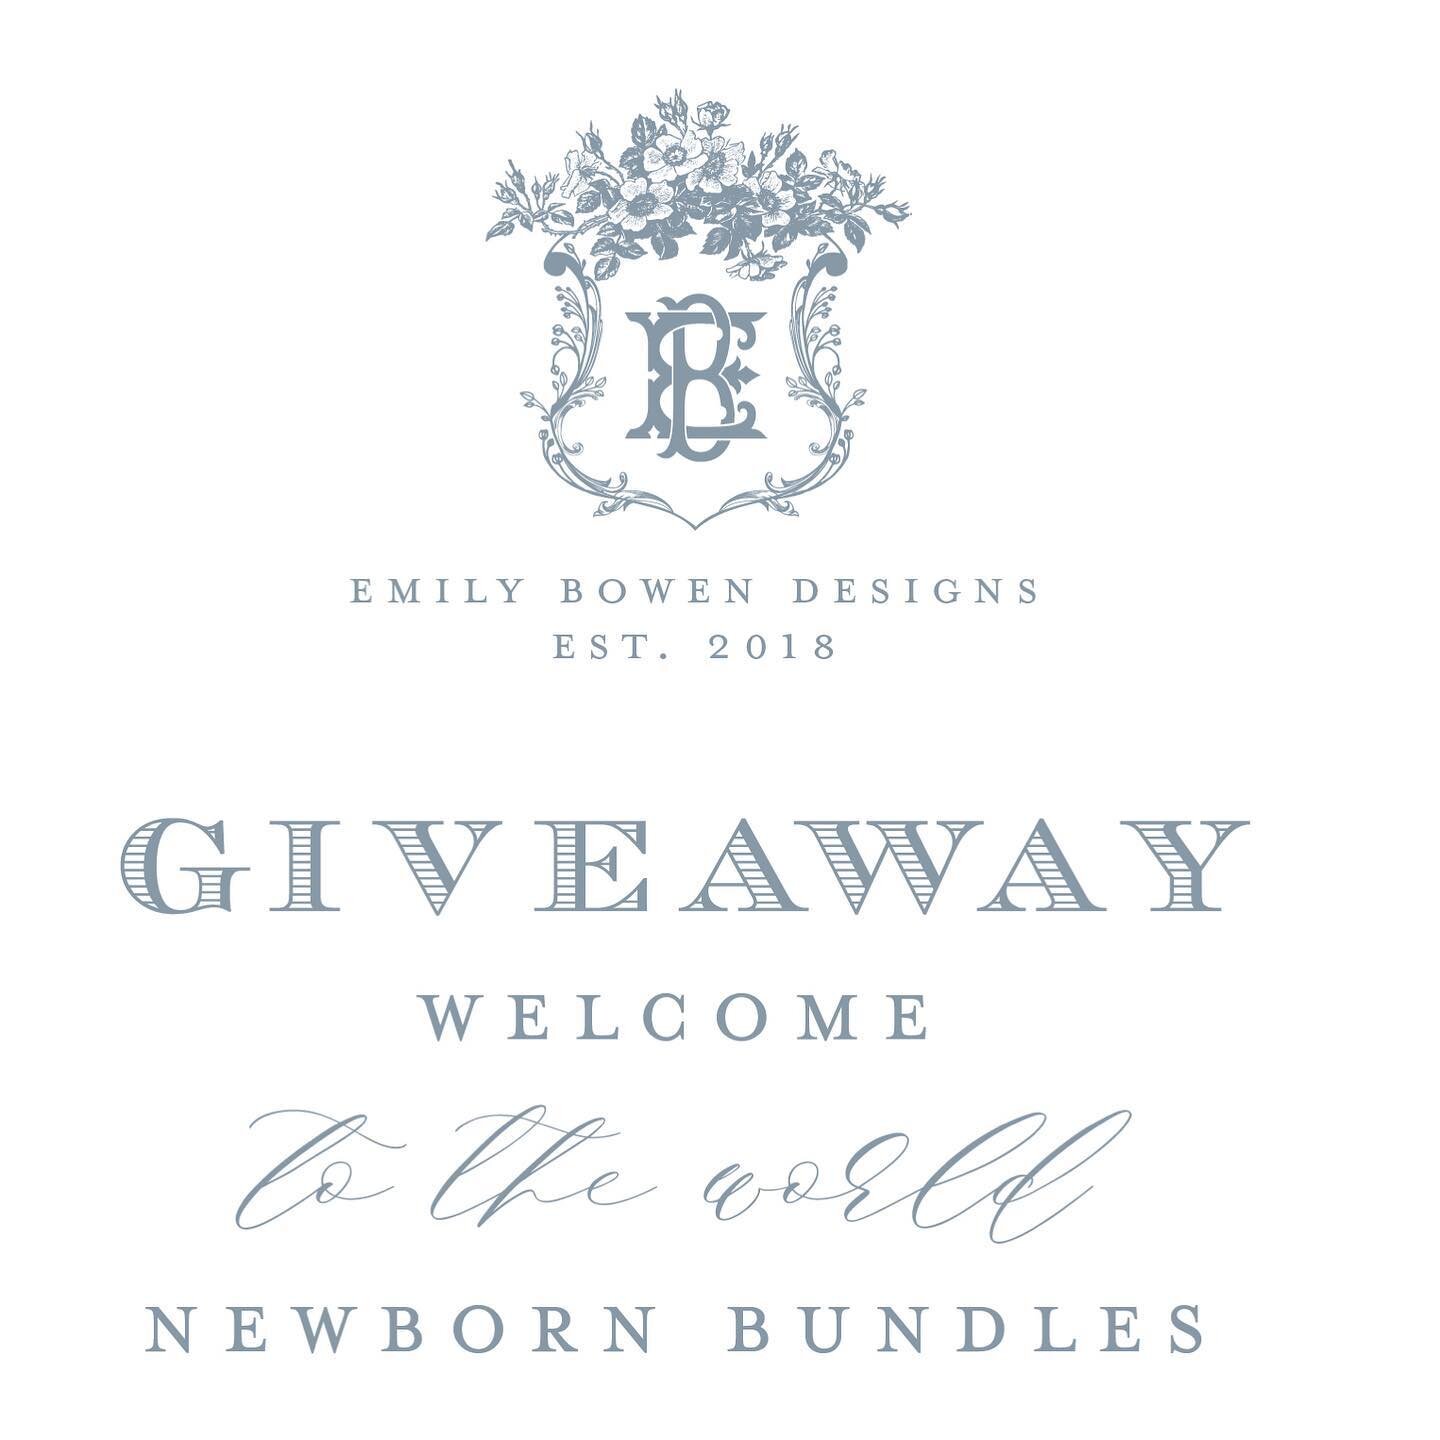 Let&rsquo;s head into the weekend with a GIVEAWAY! Want to win one our our brand new Welcome to the World Newborn Bundles?! Here&rsquo;s how: 1) follow @emily.bowen.designs 2) like this post 3) tag a mama friend 4) share the photo from our story to y